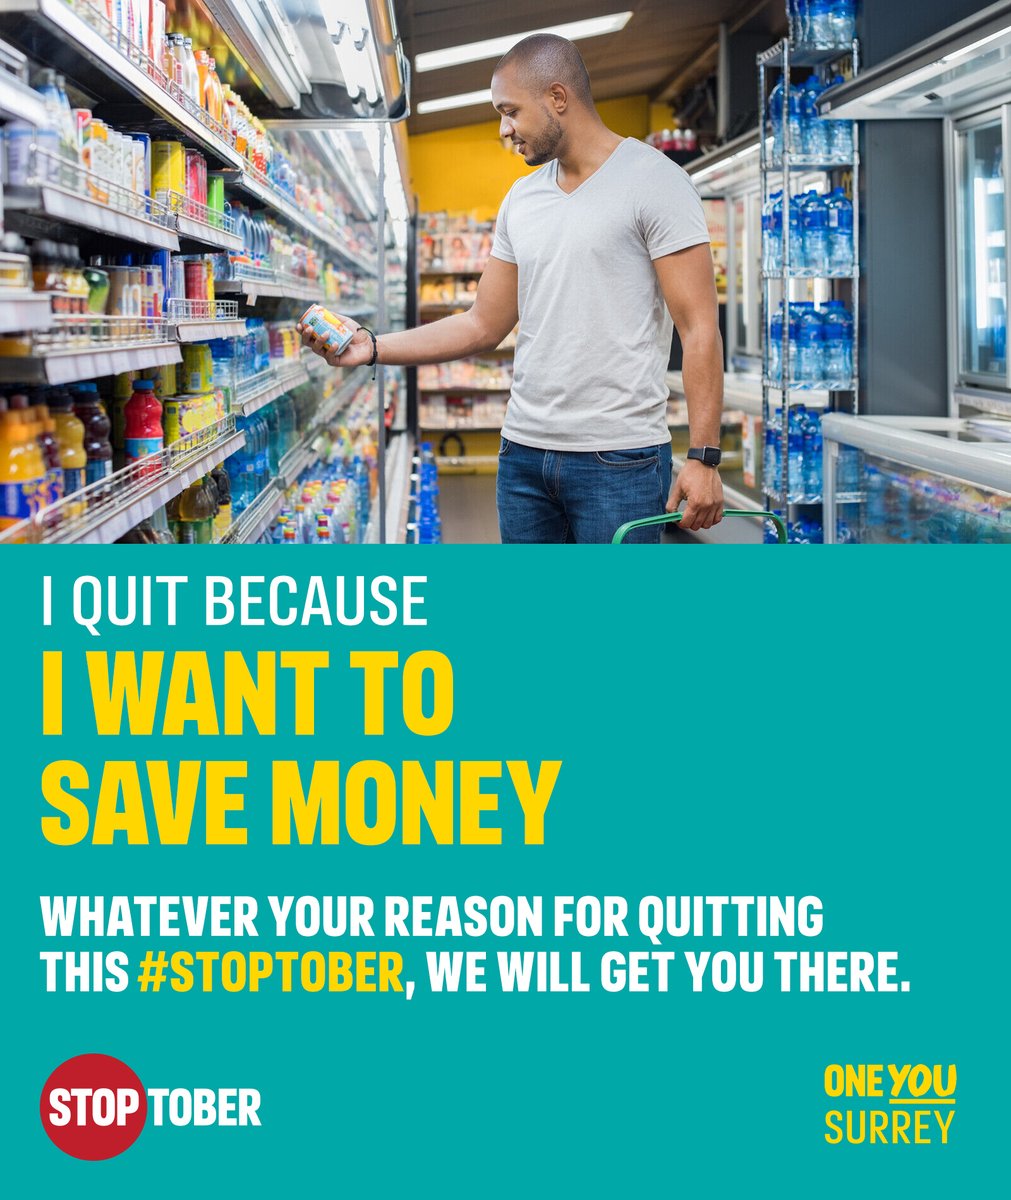 Just 3 days until #Stoptober starts! 🚭 Did you know that if you quit smoking for 28 days you are five times more likely to quit for good? Speak to one of our friendly & non-judgmental advisors today. bit.ly/oys-stoptober